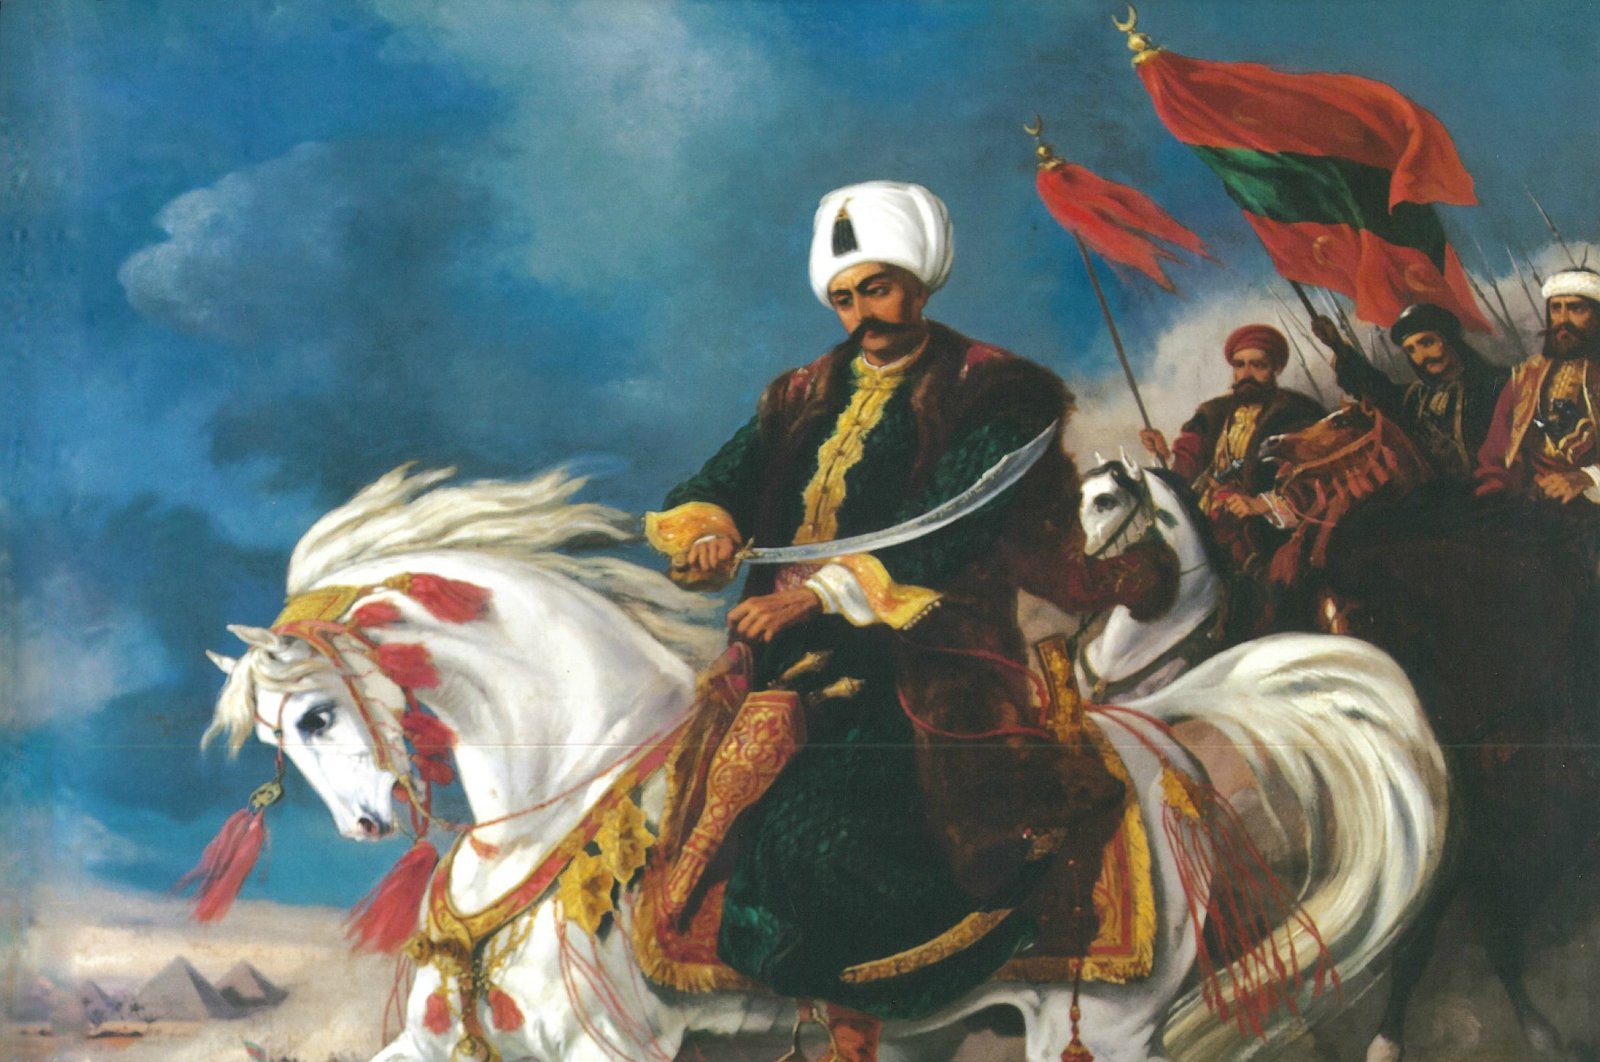 A painting depicting Selim I during the campaign to conquer Egypt, located in Army Museum, Istanbul. (Shutterstock Photo)